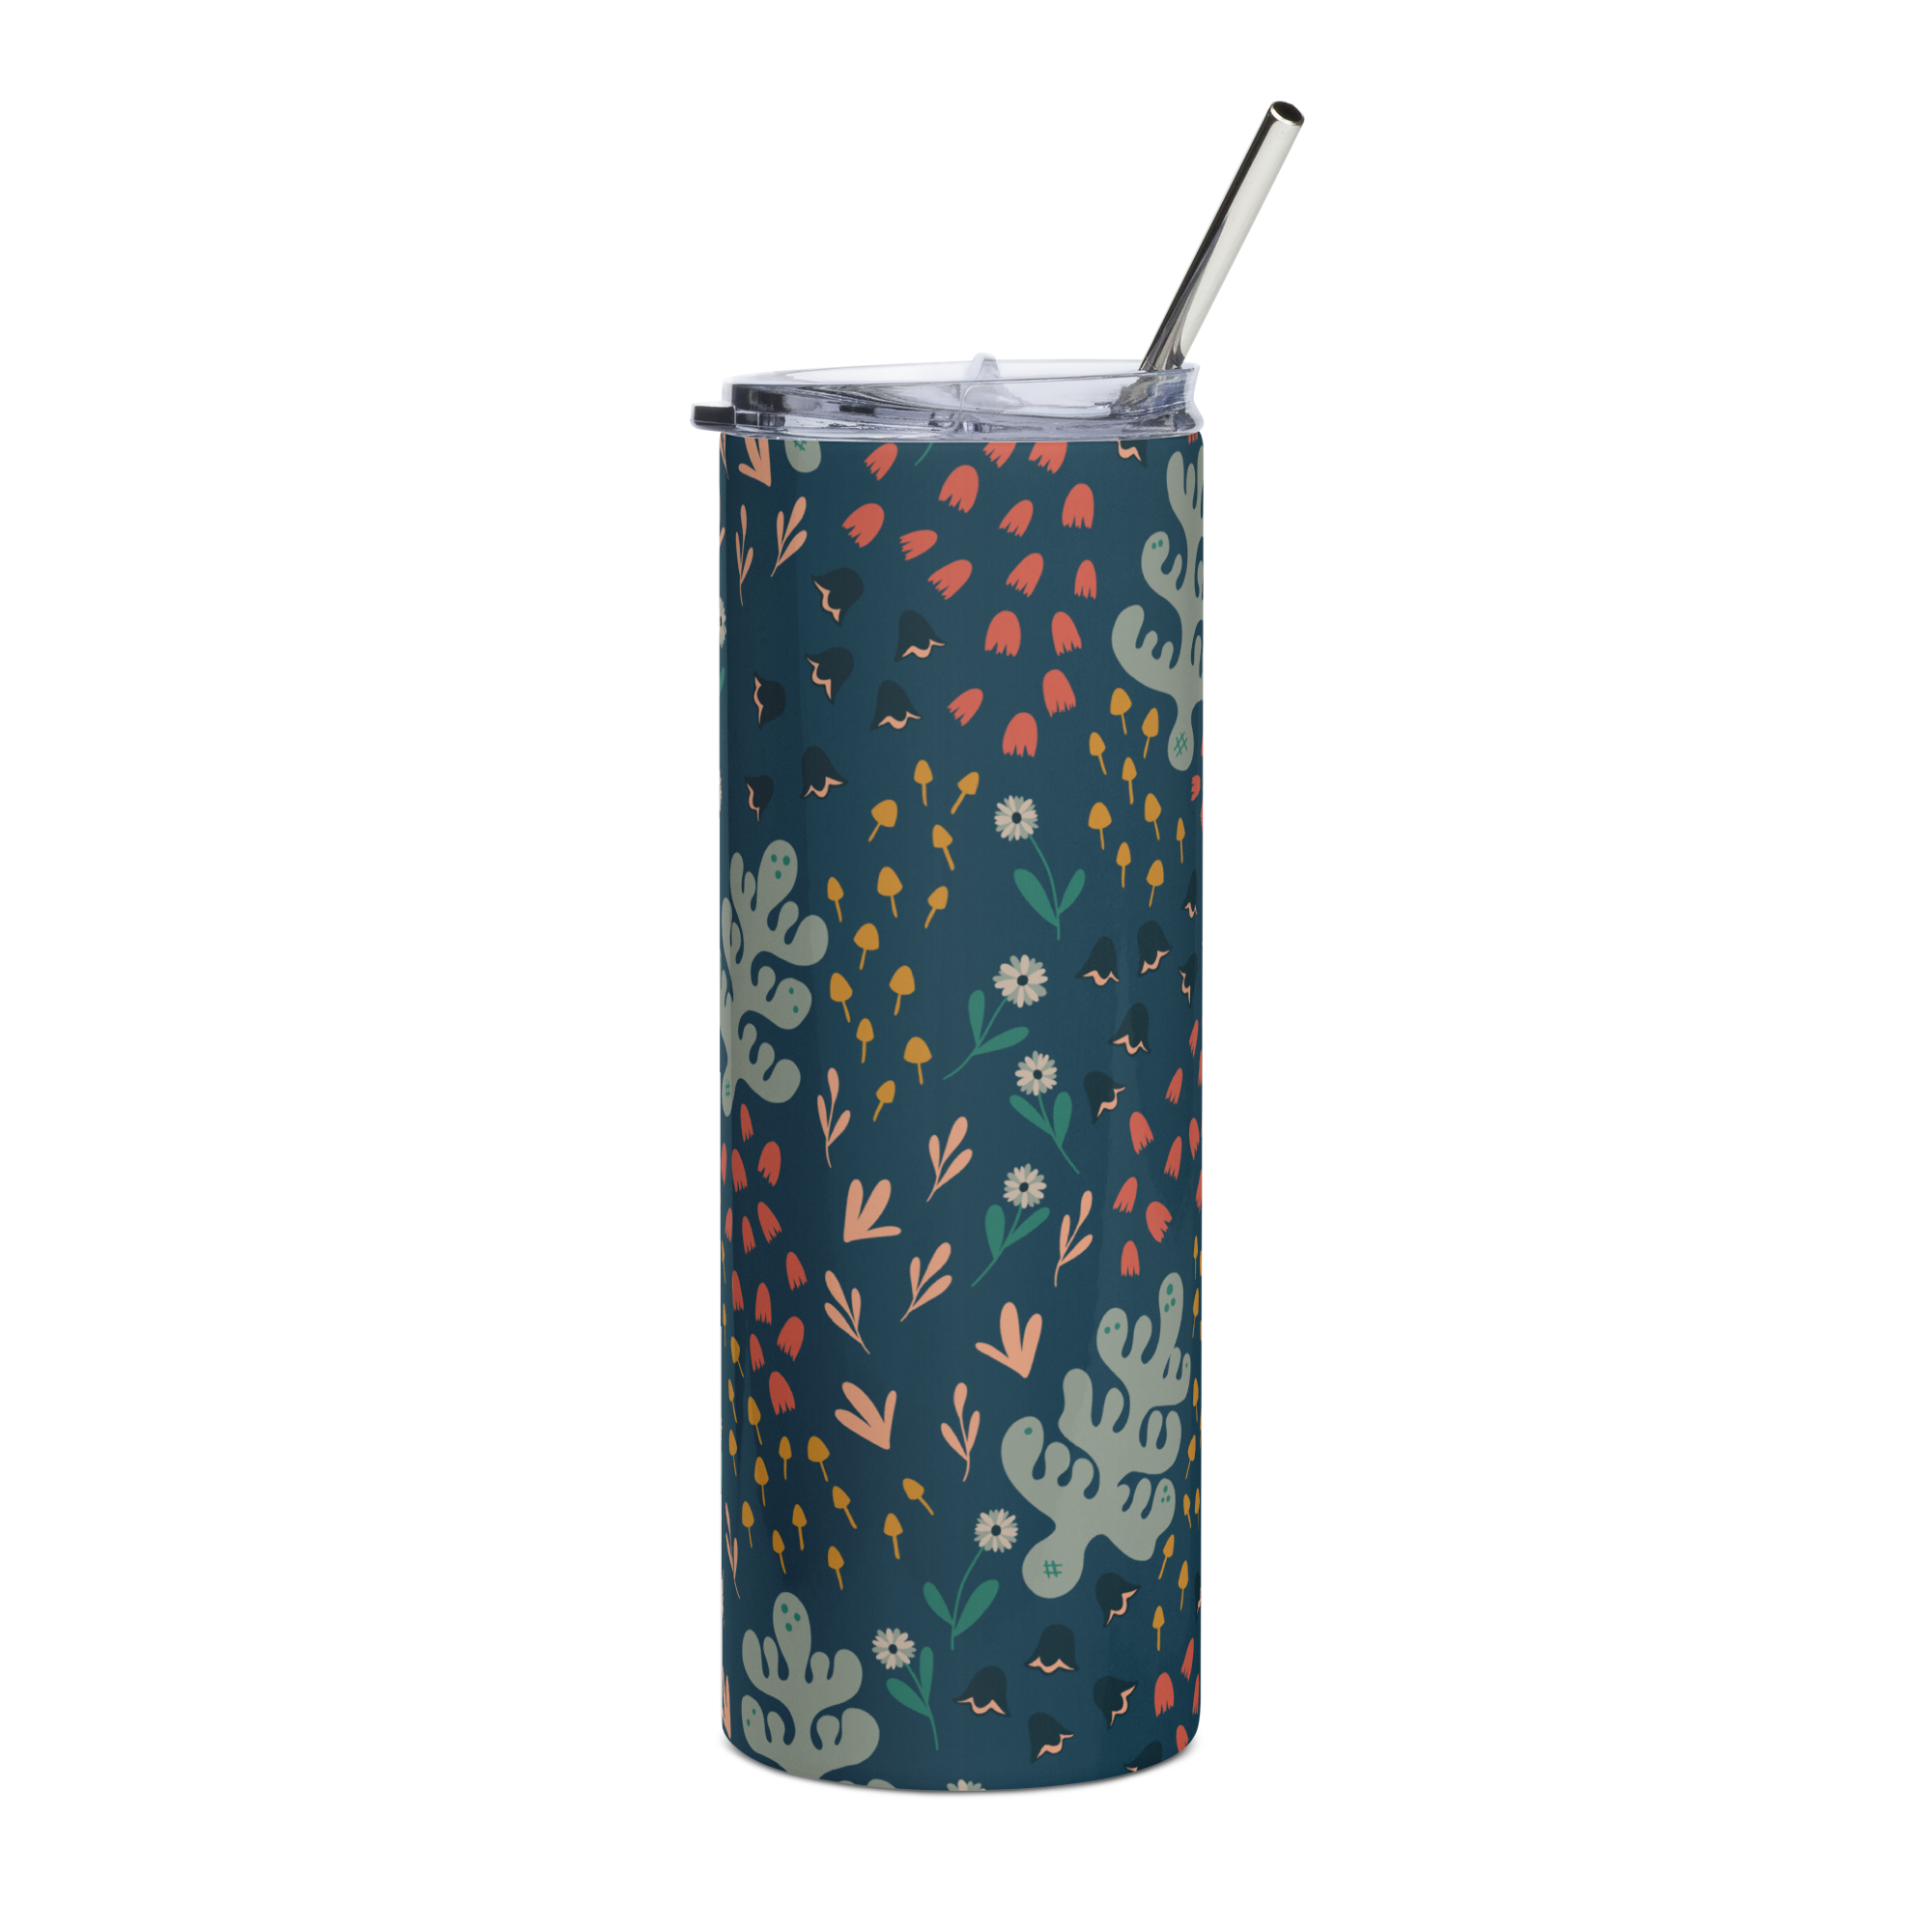 Decorative stainless steel tumbler